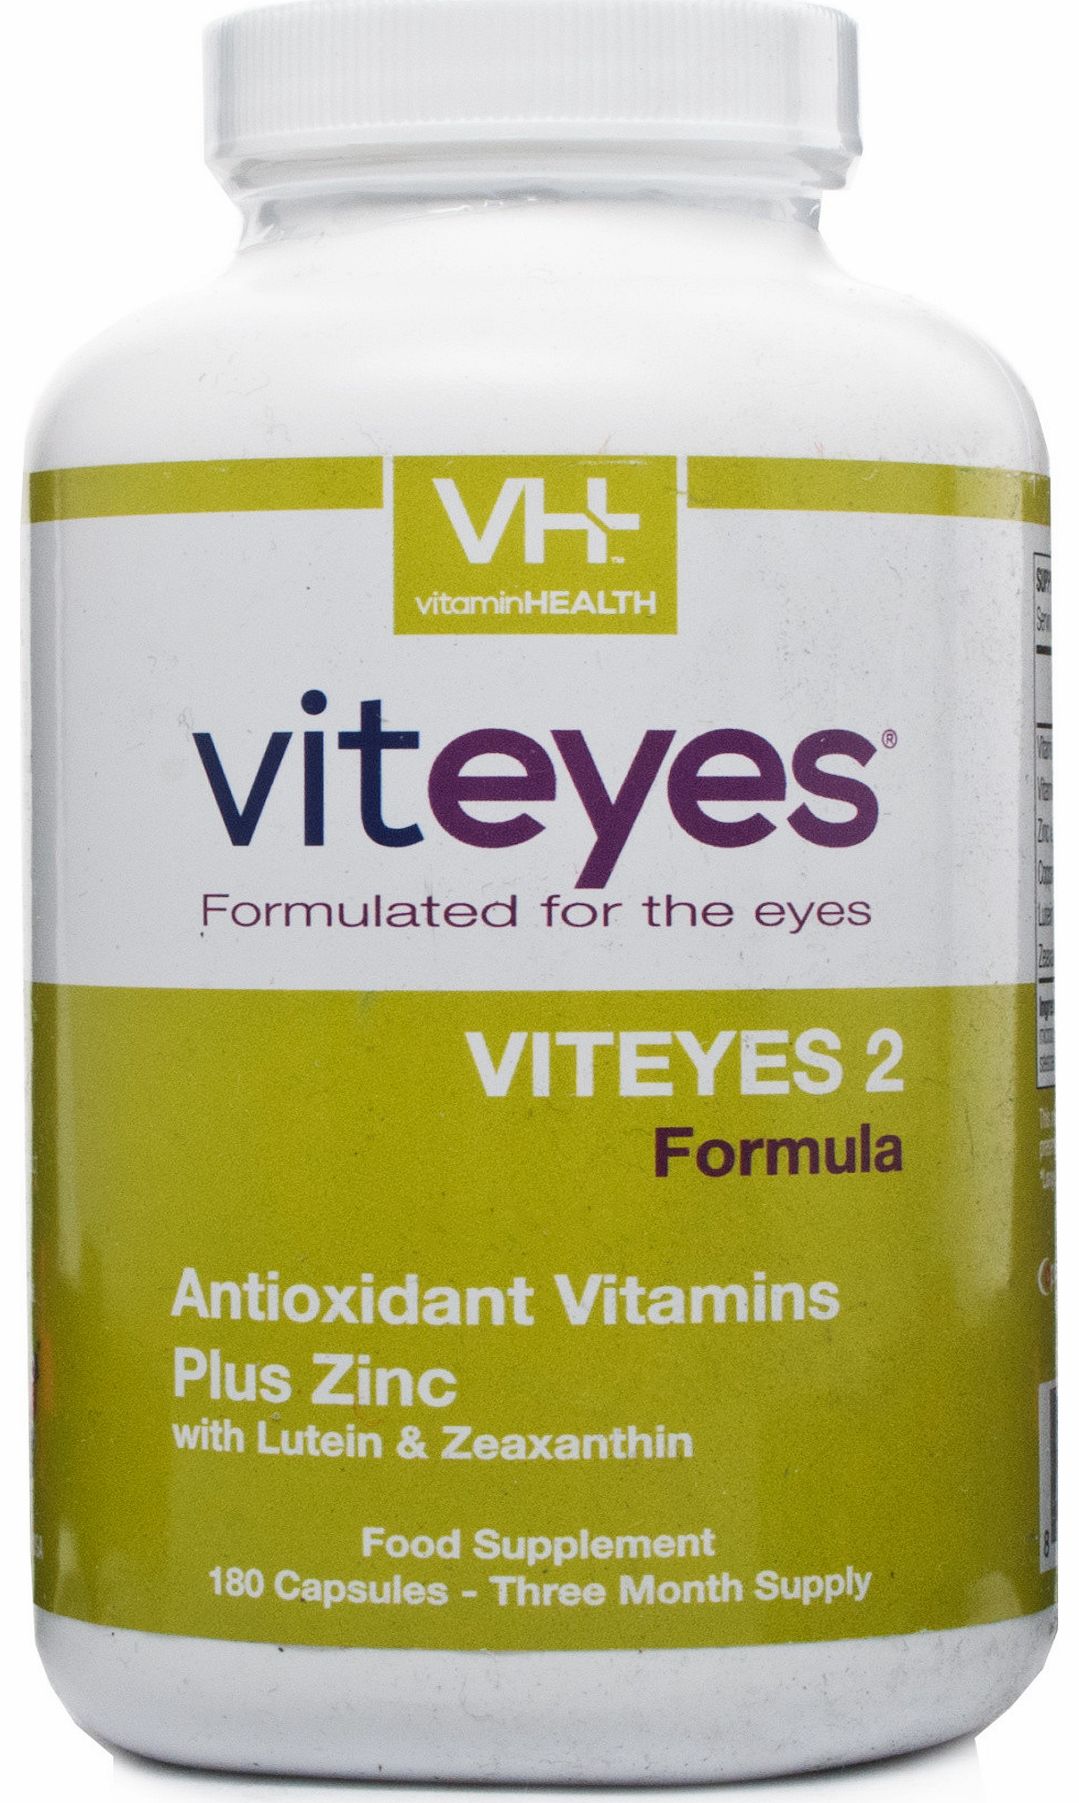 Viteyes 2 contains vitamins C and E, zinc, copper as well as 10mg of lutein and 2mg of zeaxanthin which work well together to provide your eyes with all the nutrition it needs in order to stay healthy. Vision is extremely important which is why maint